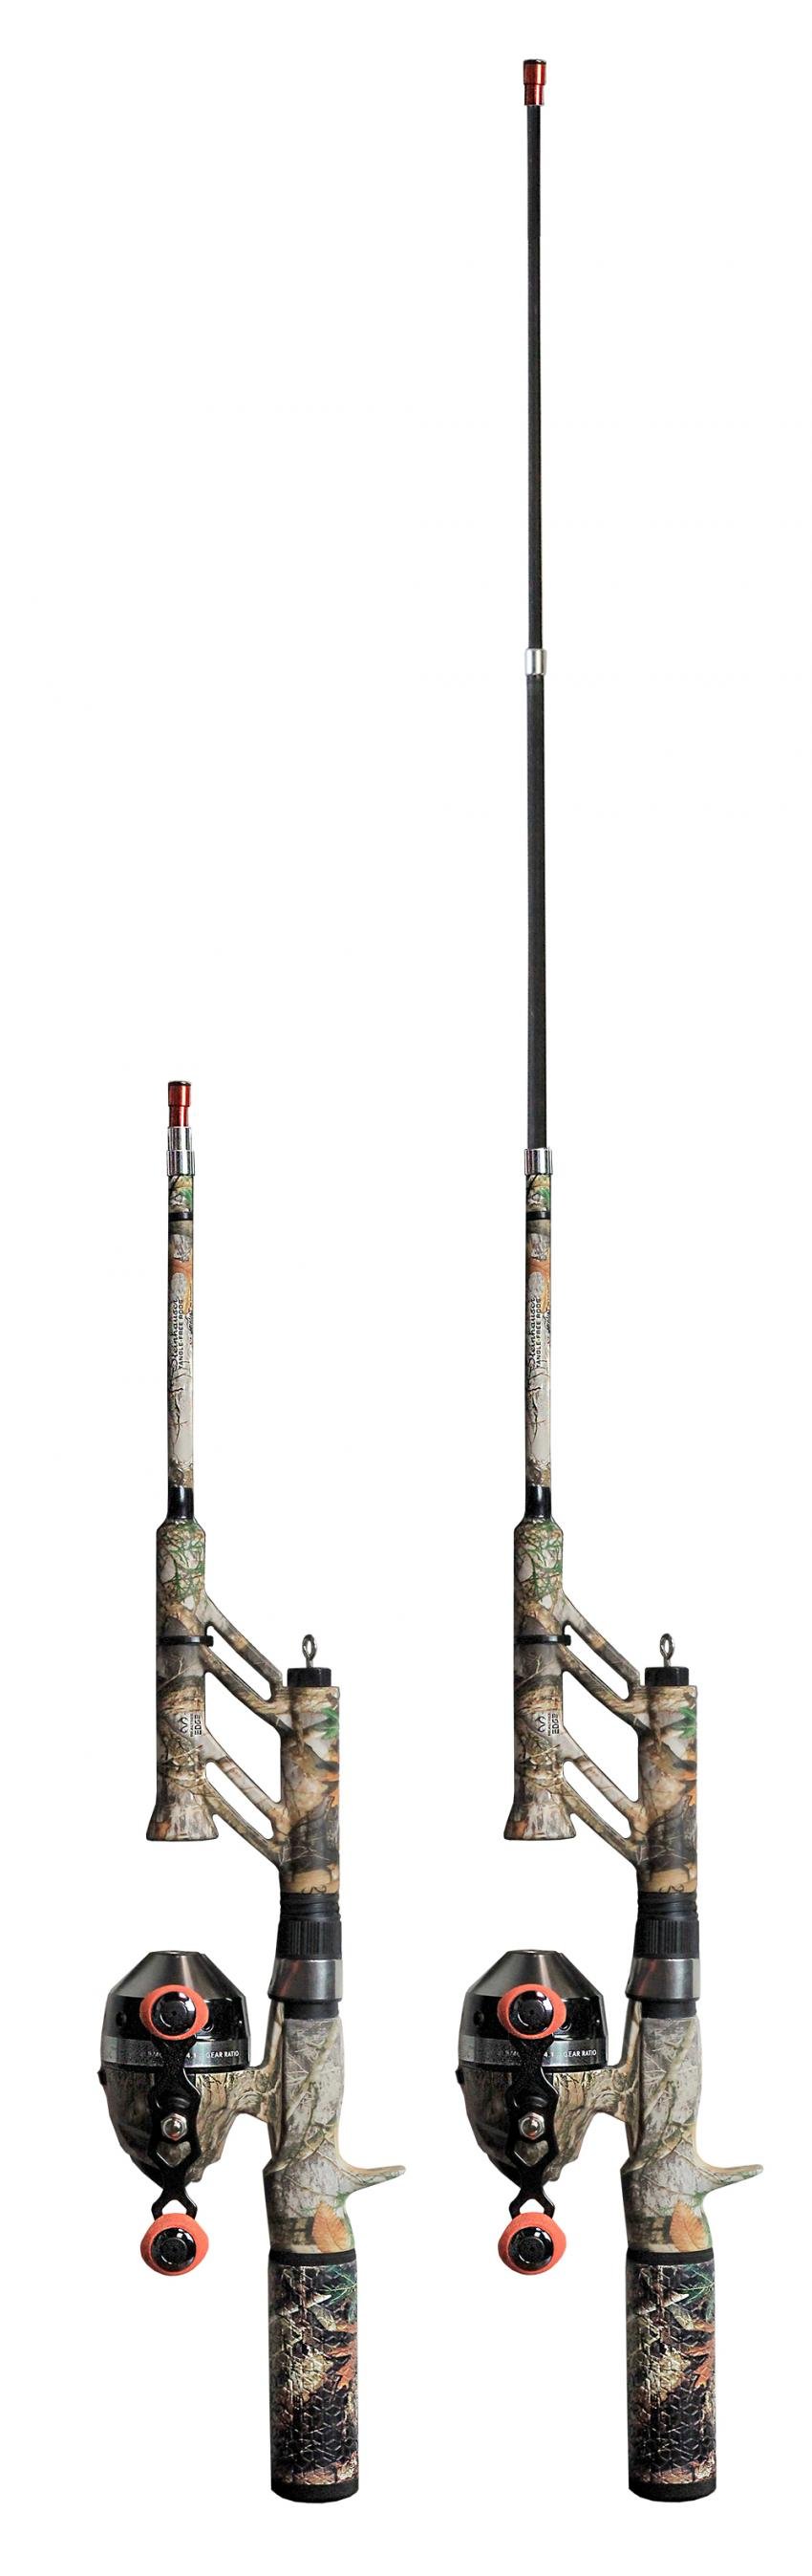 ProFISHiency 6-foot 8-inch Spinning Combo in Realtree EDGE